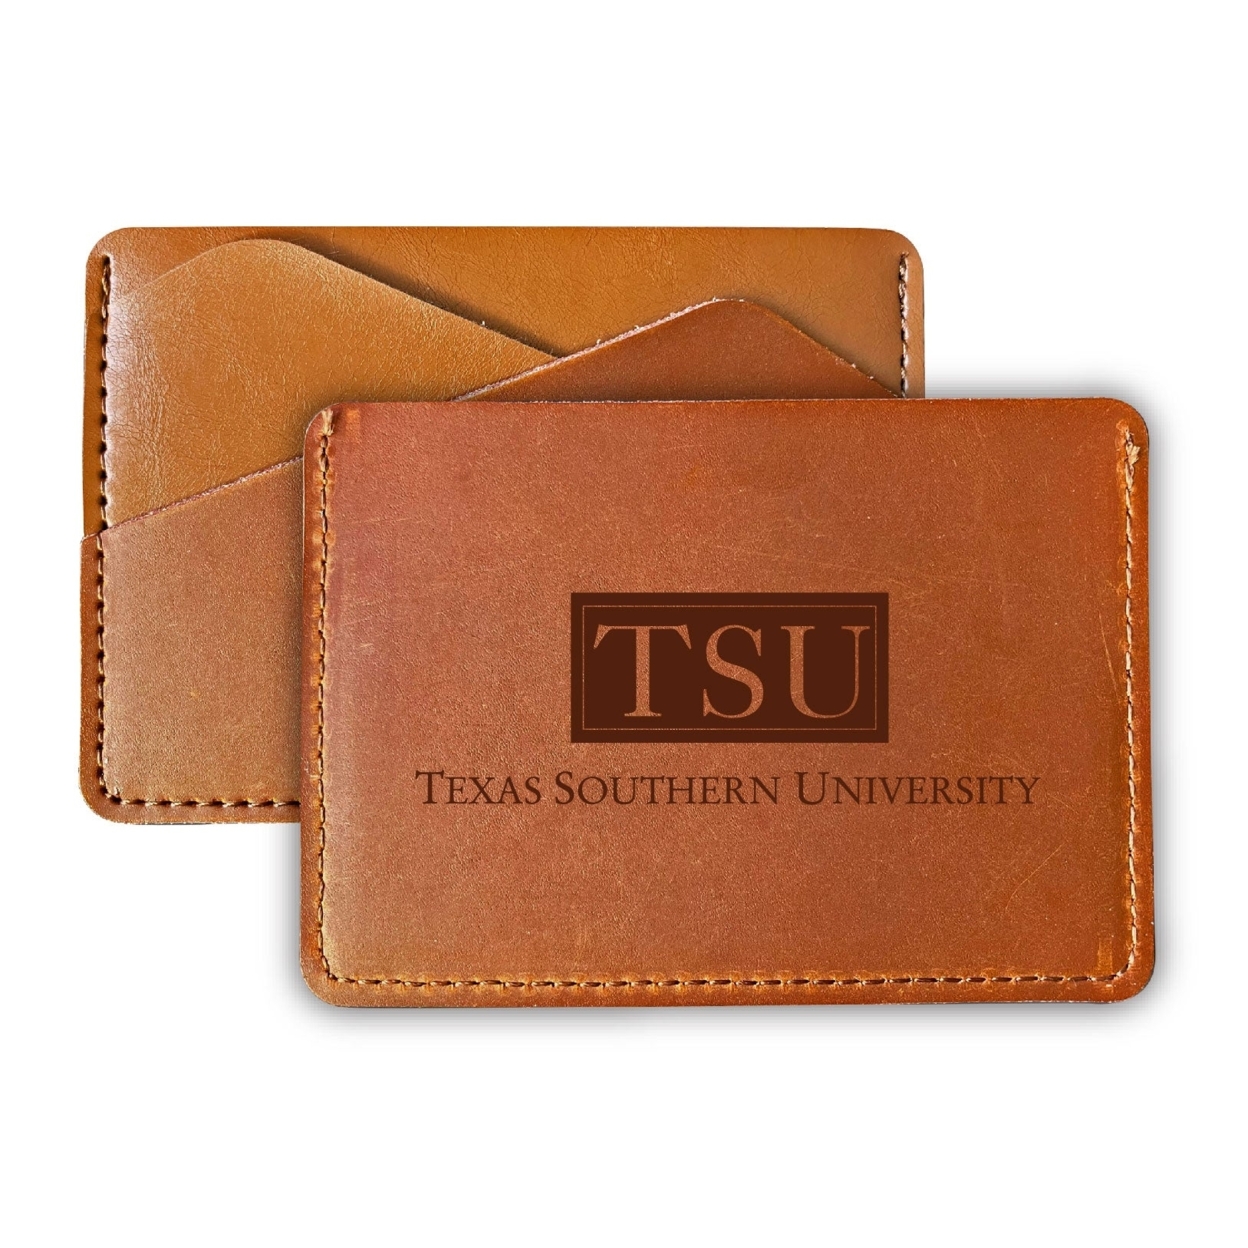 Texas Southern University College Leather Card Holder Wallet